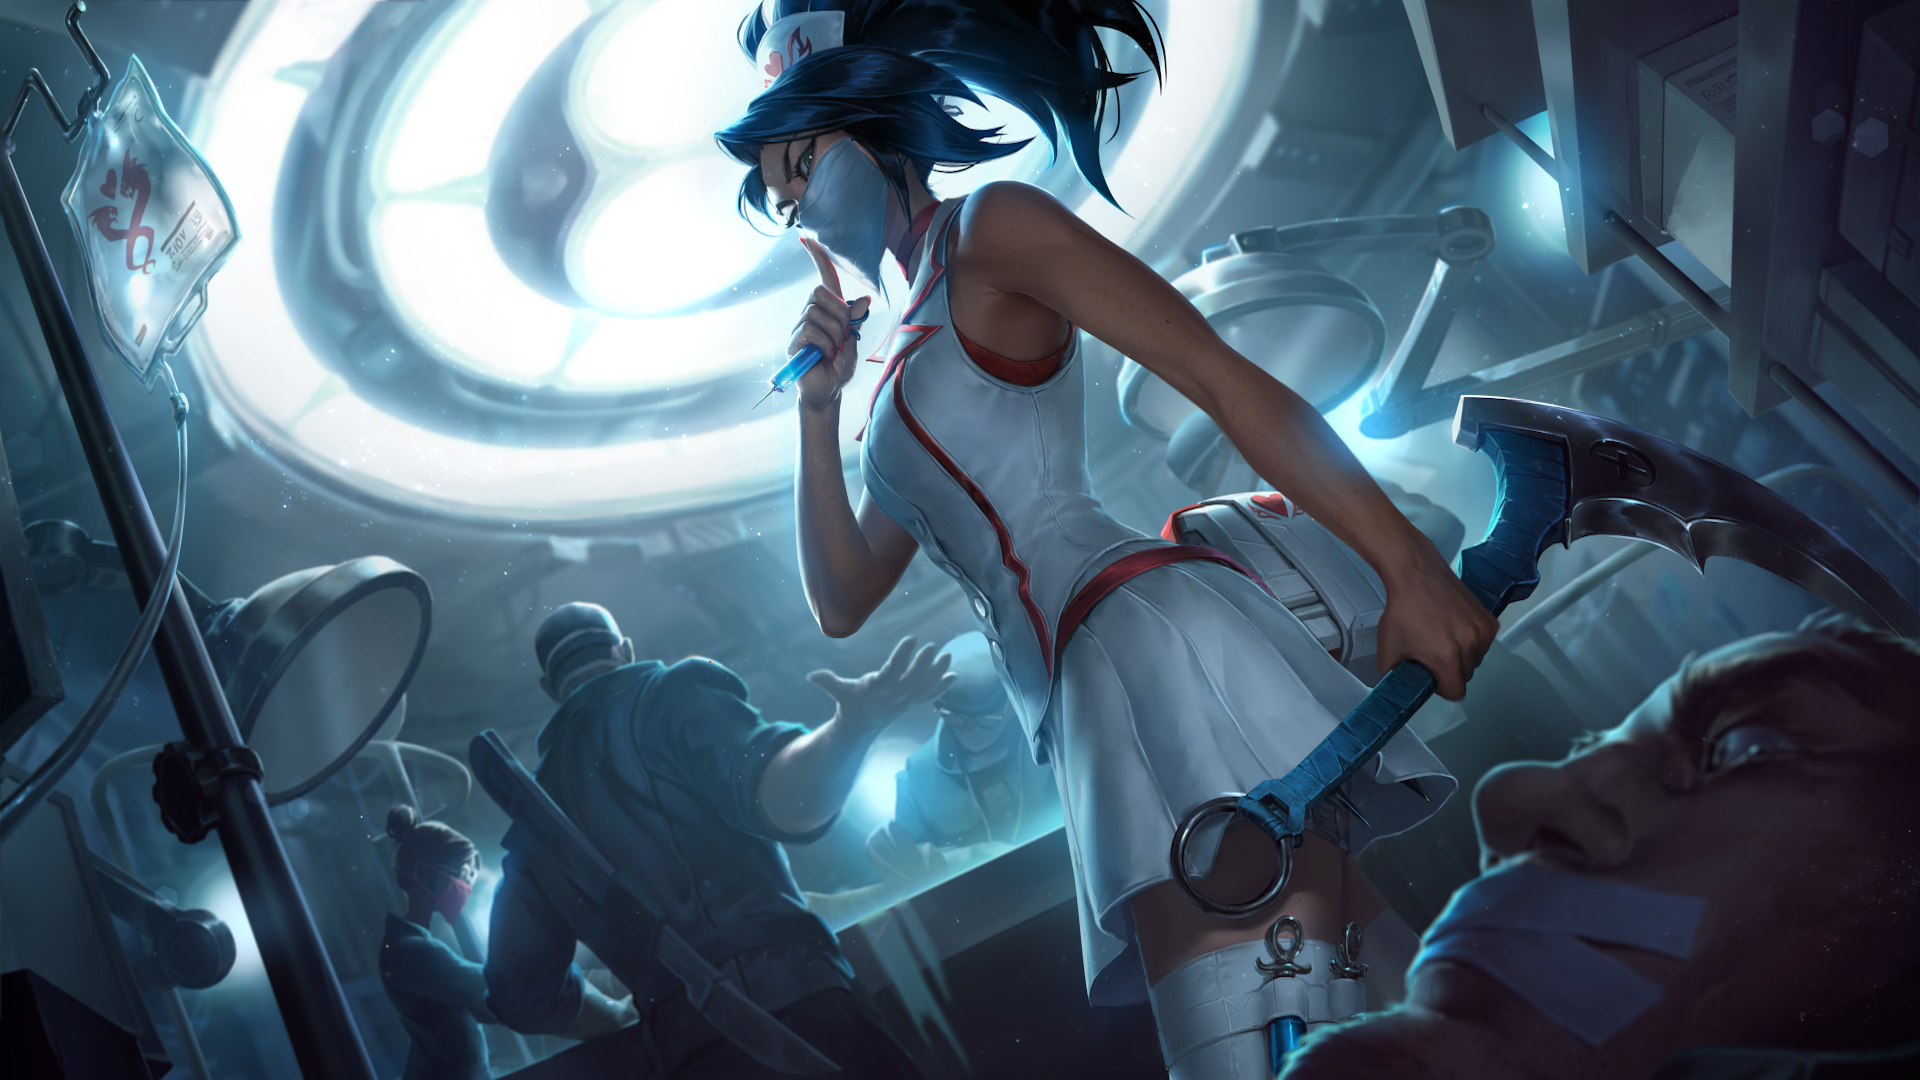 New League of Legends skins for Akali, Shen, and Kennen will aid COVID